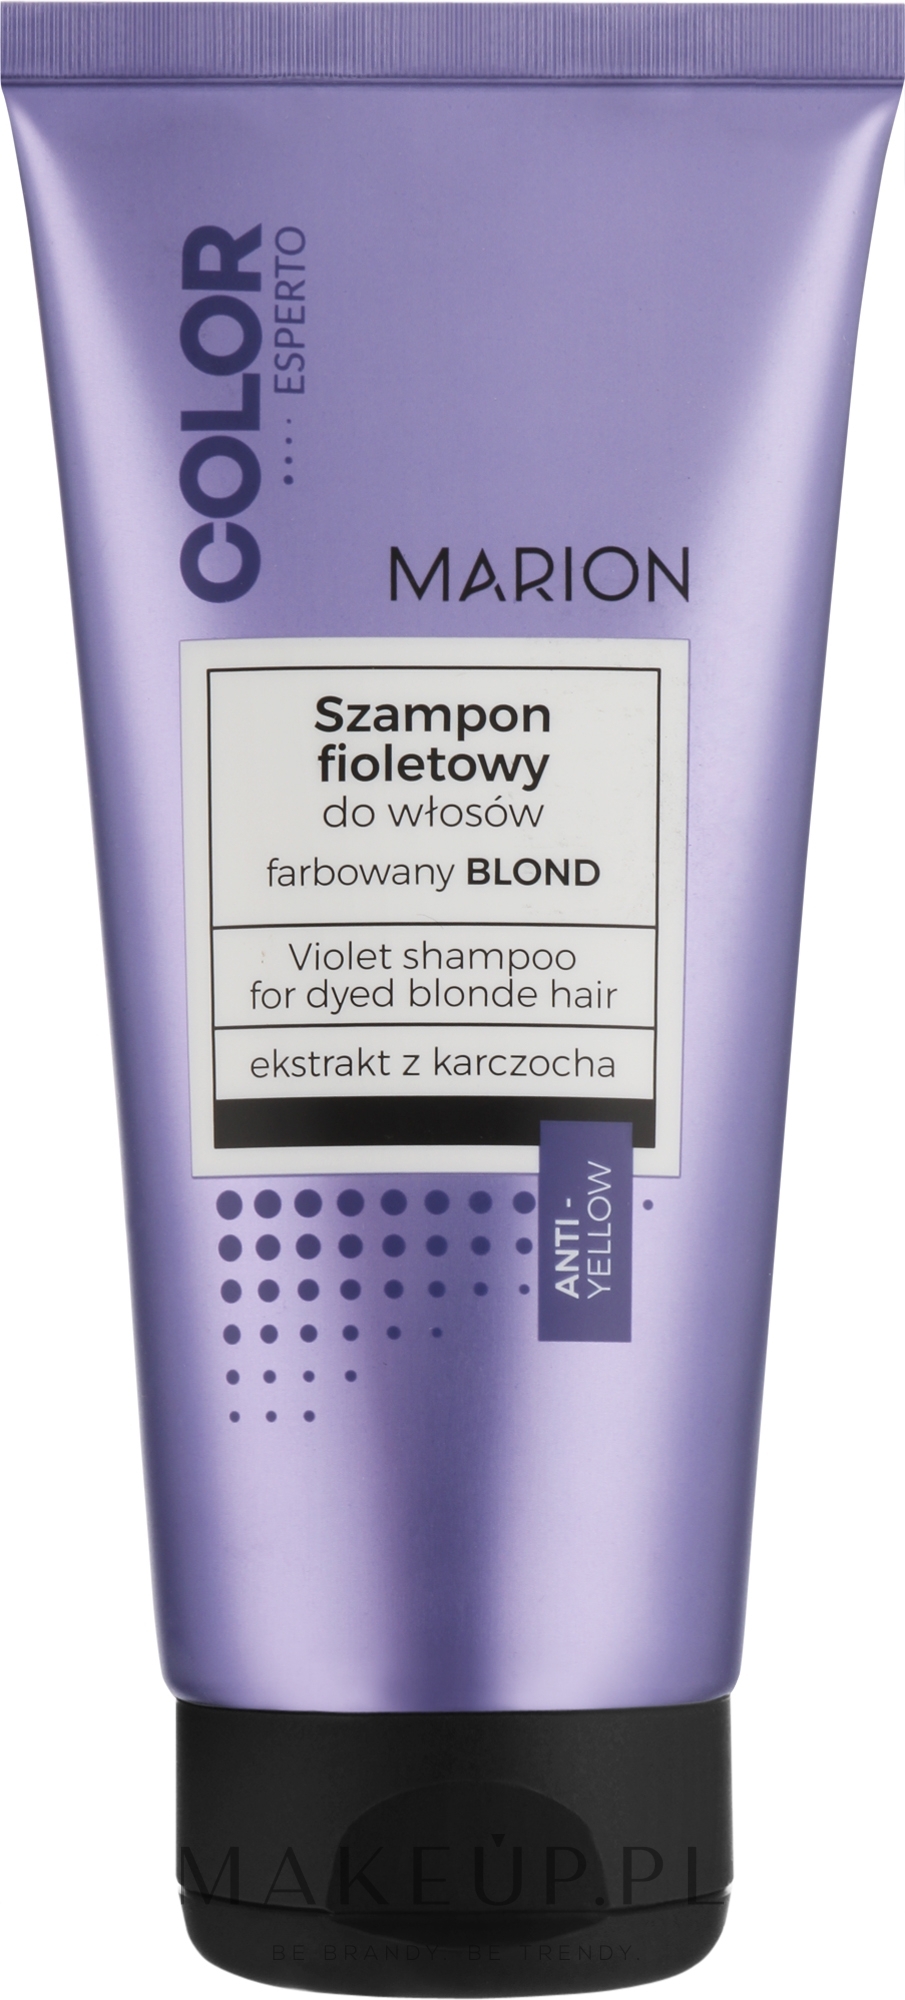 fioletowy szampon marion